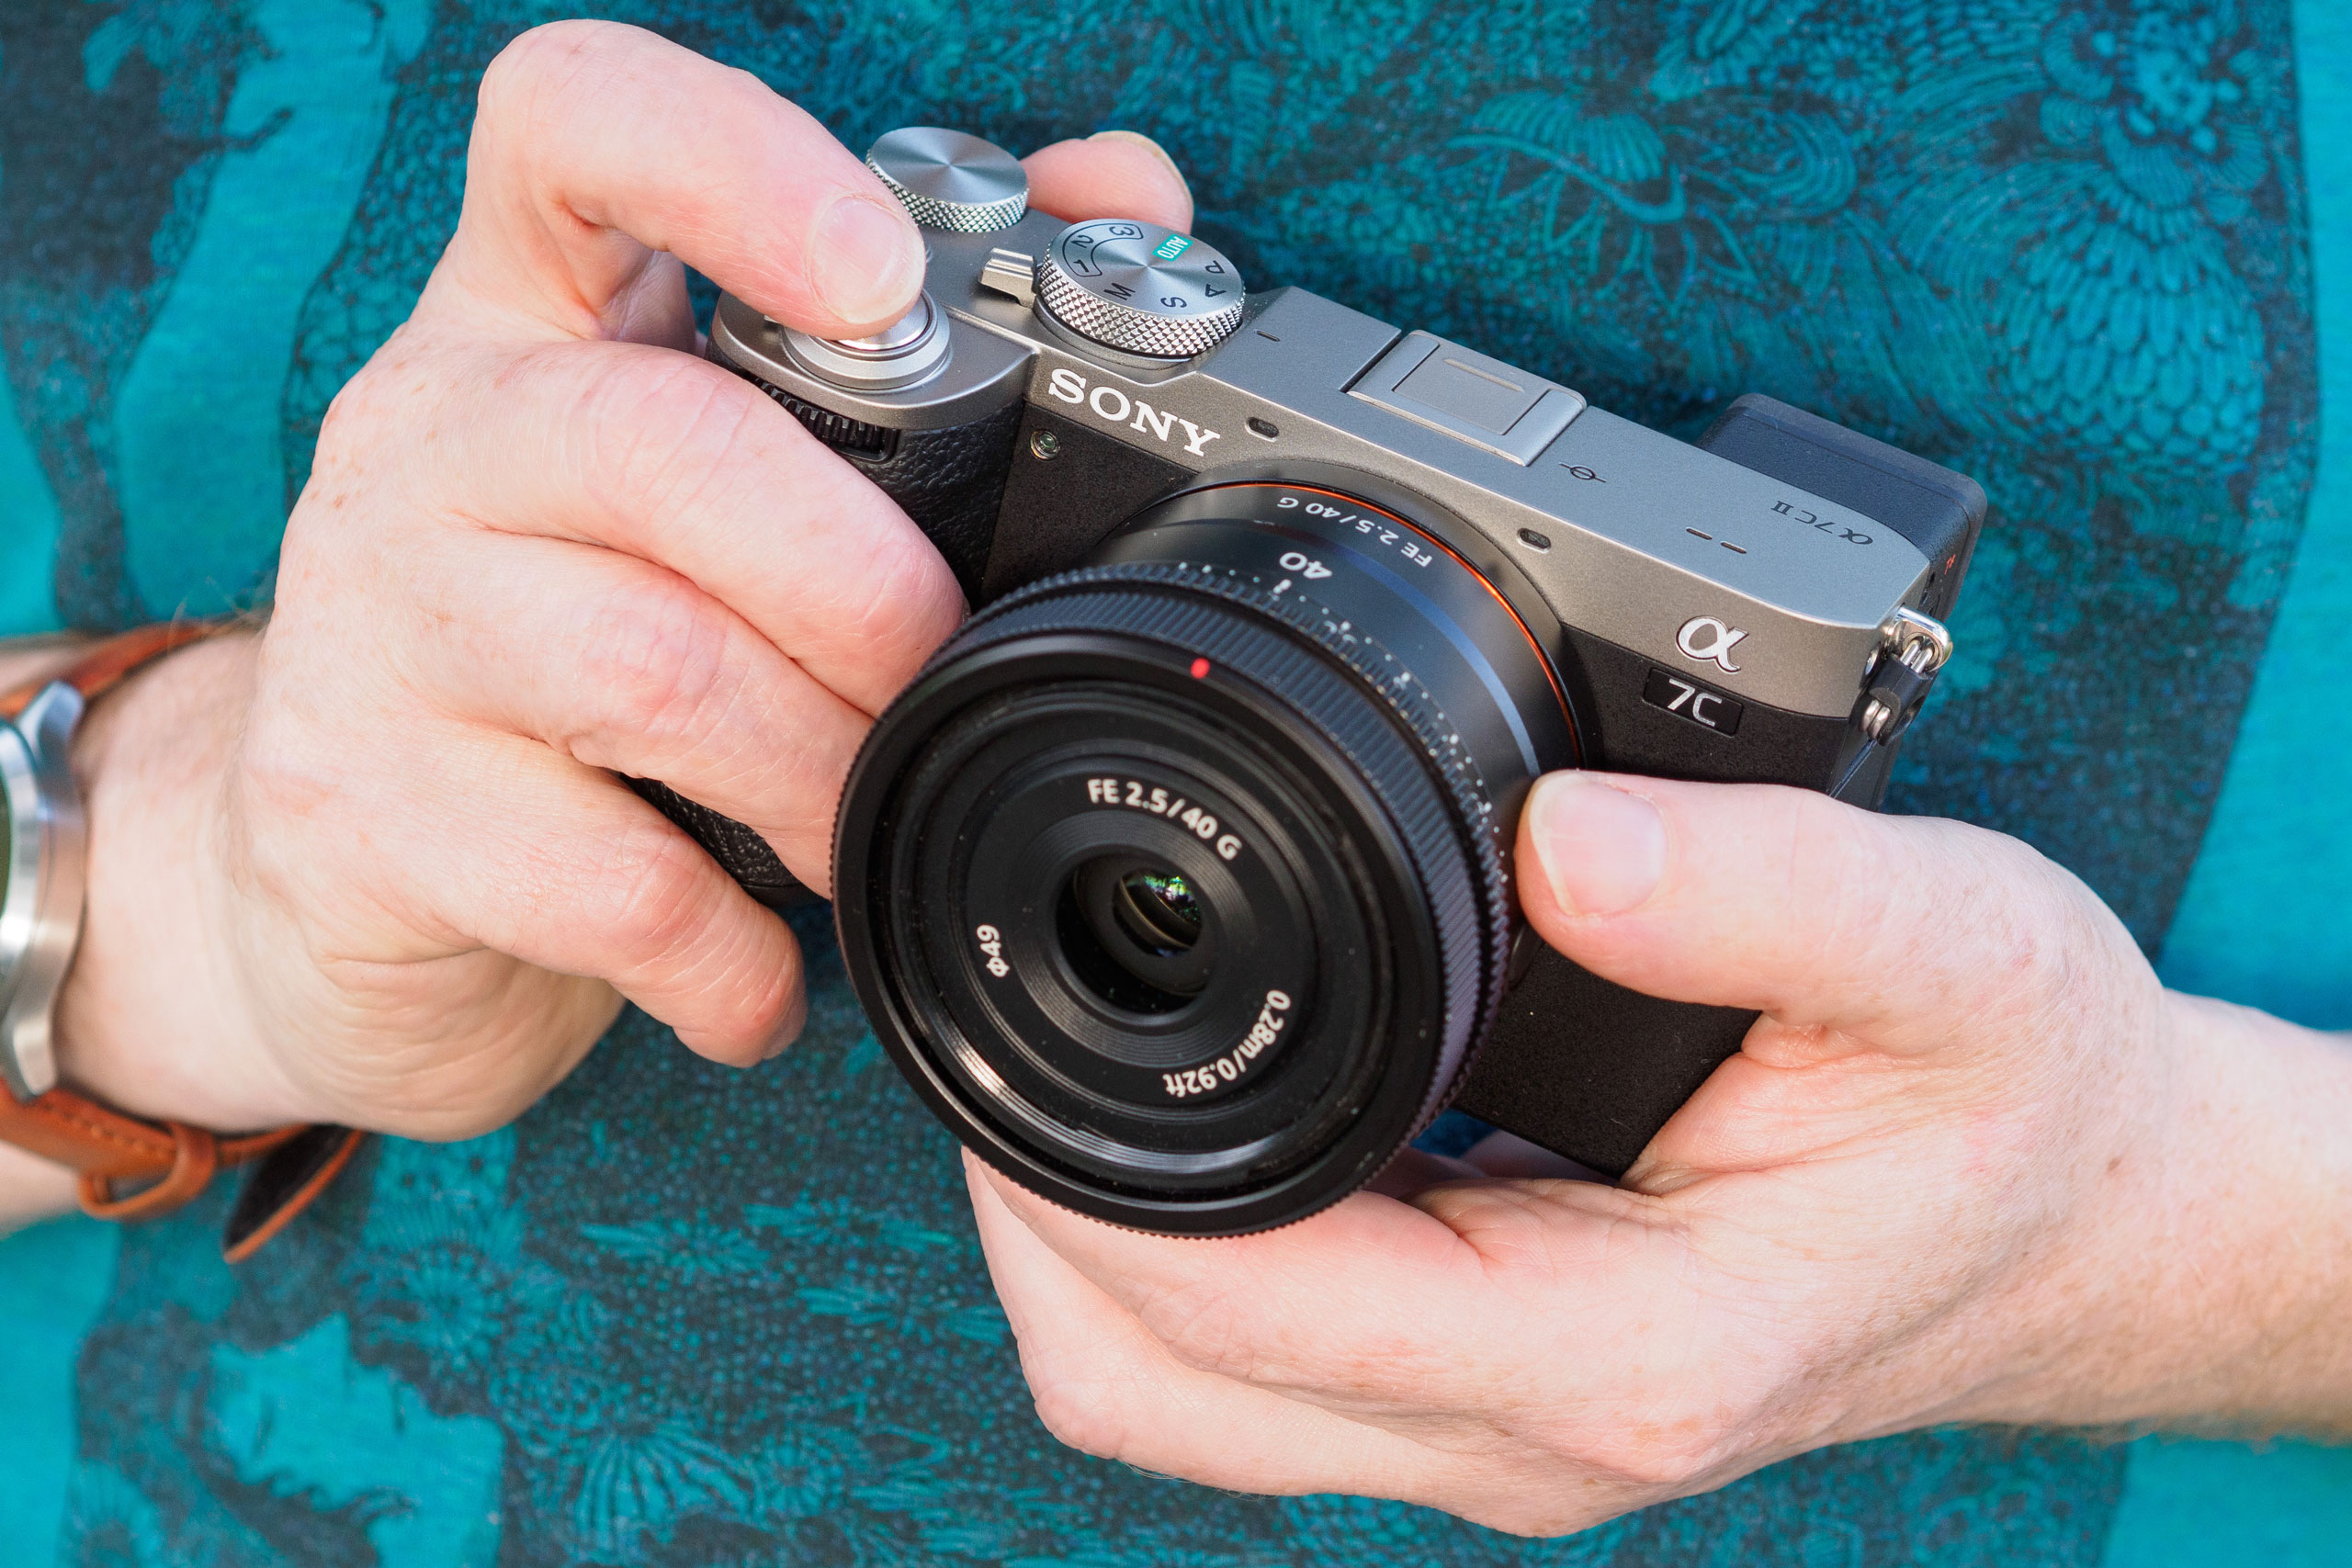 Hands On Review Roundup: The New Sony Alpha 7C II, Sony